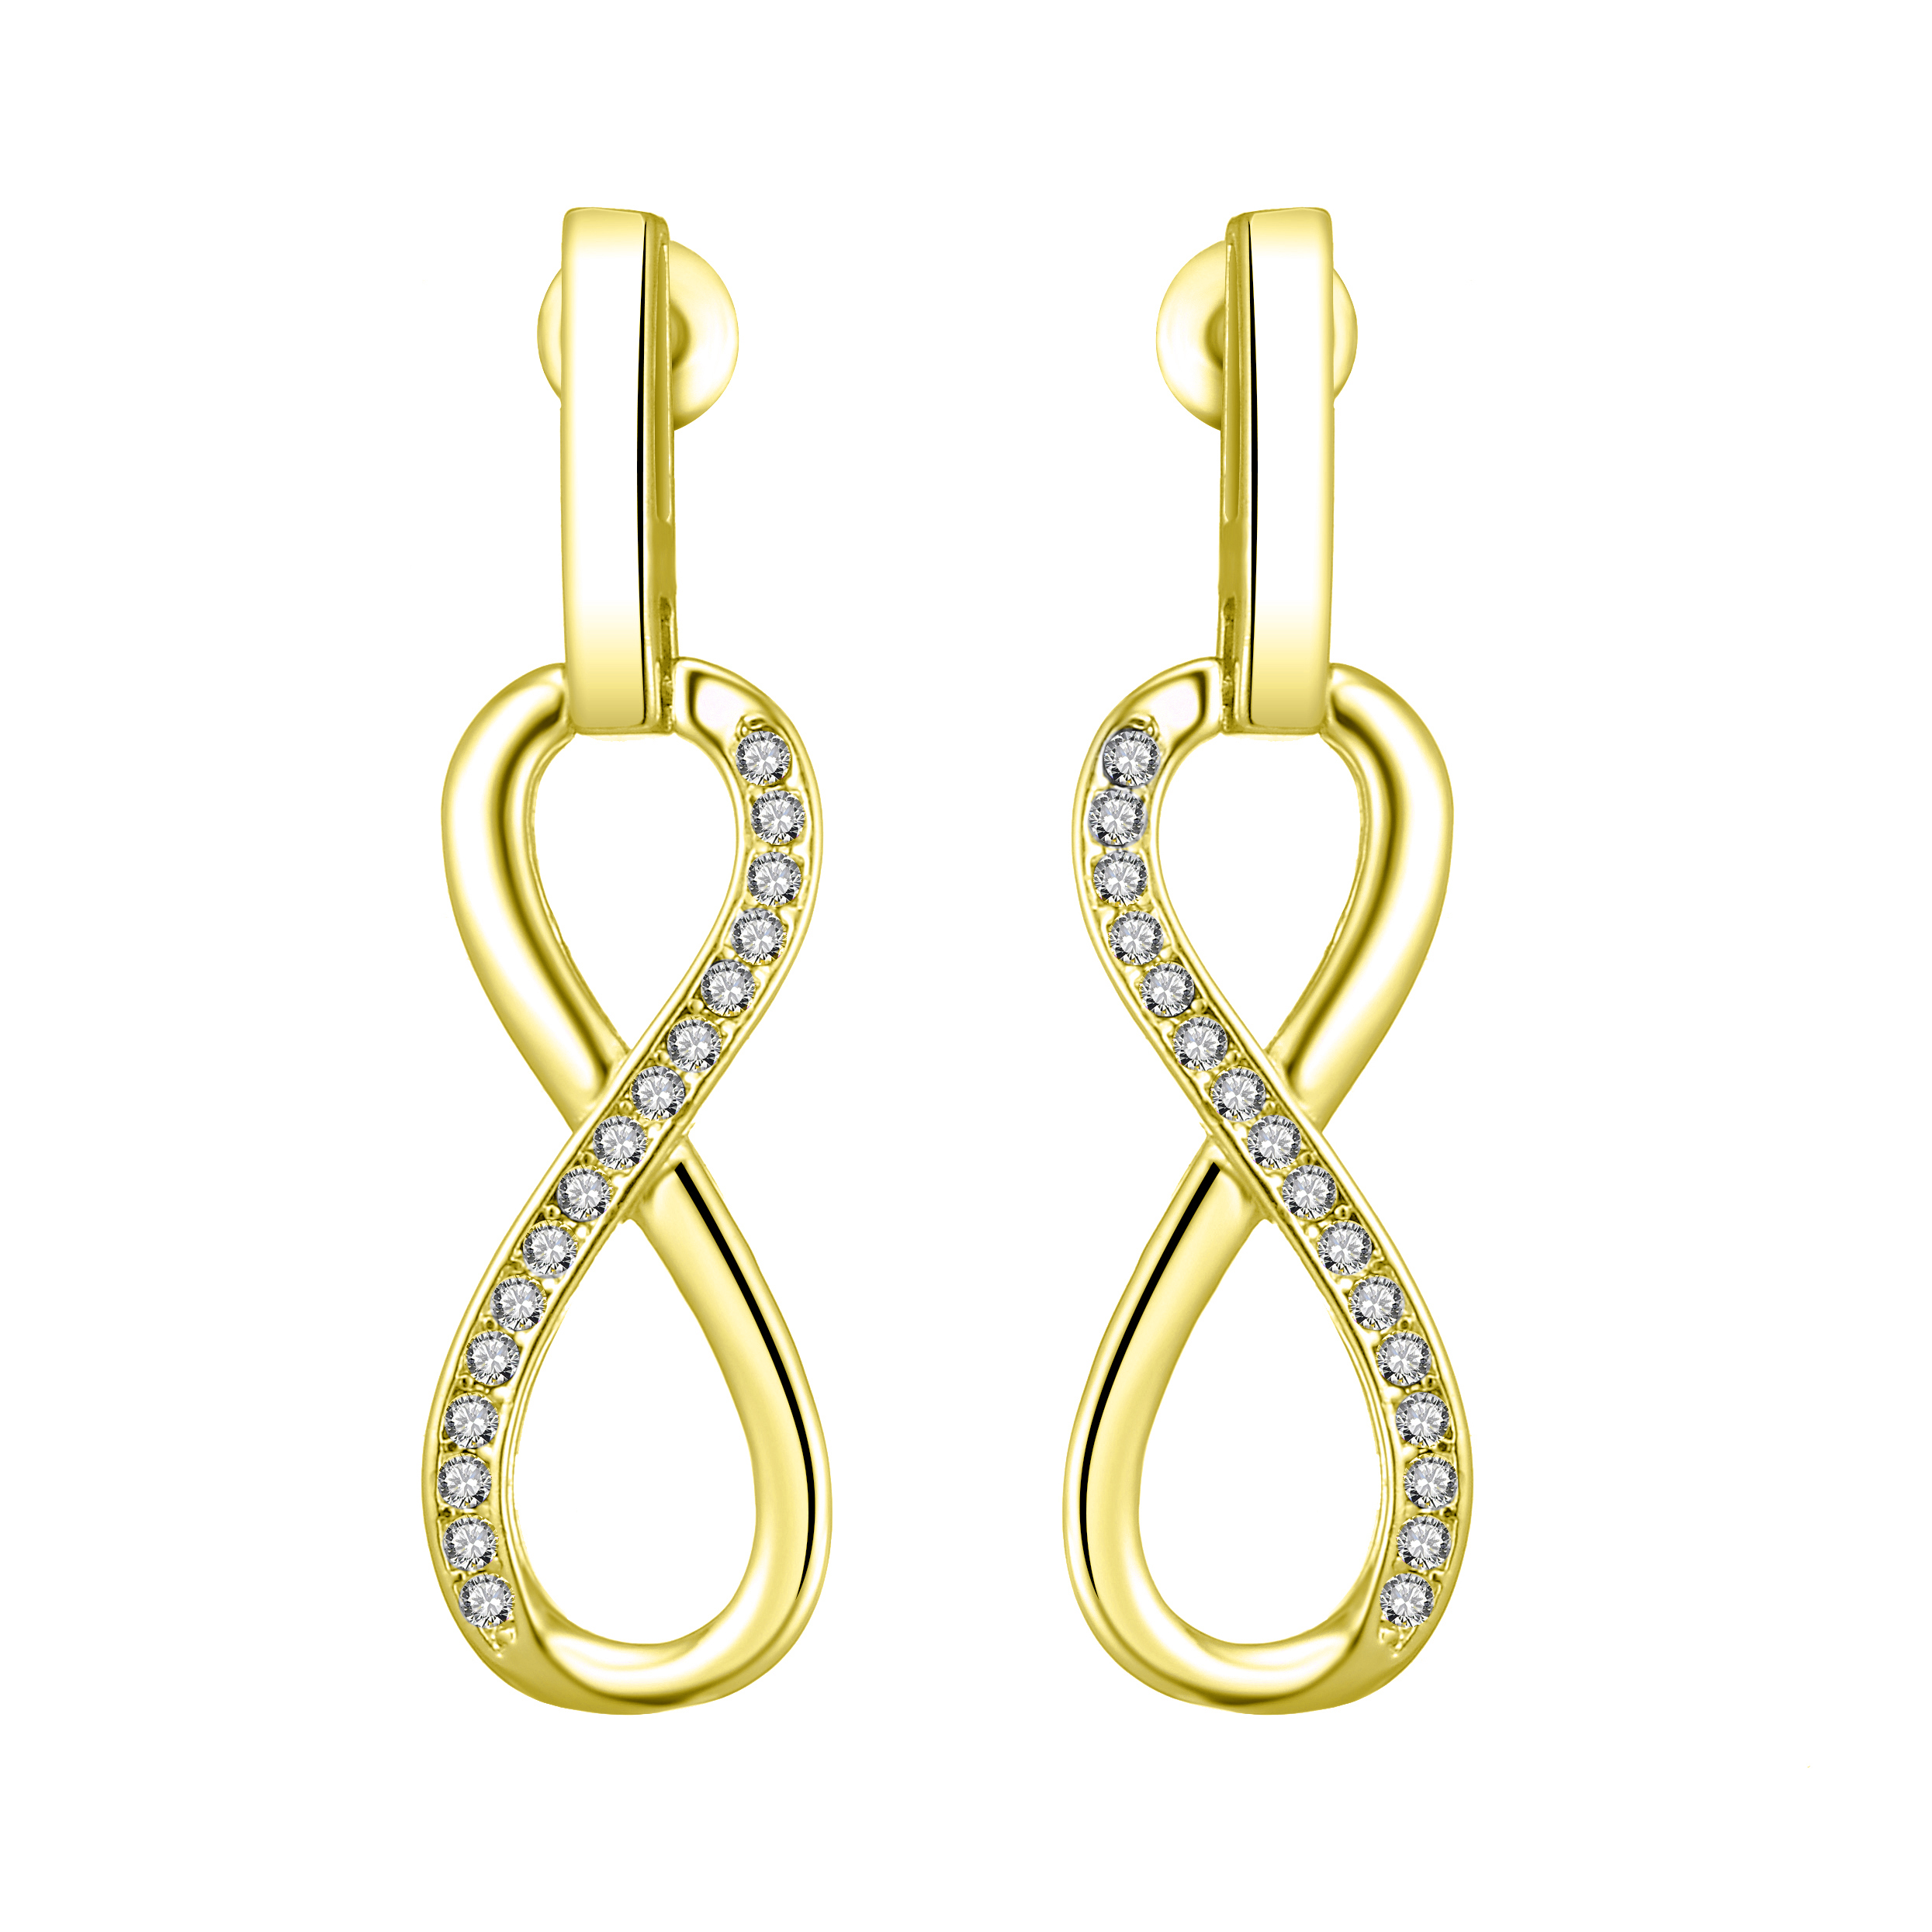 Gold Plated Infinity Drop Earrings Created with Zircondia® Crystals by Philip Jones Jewellery